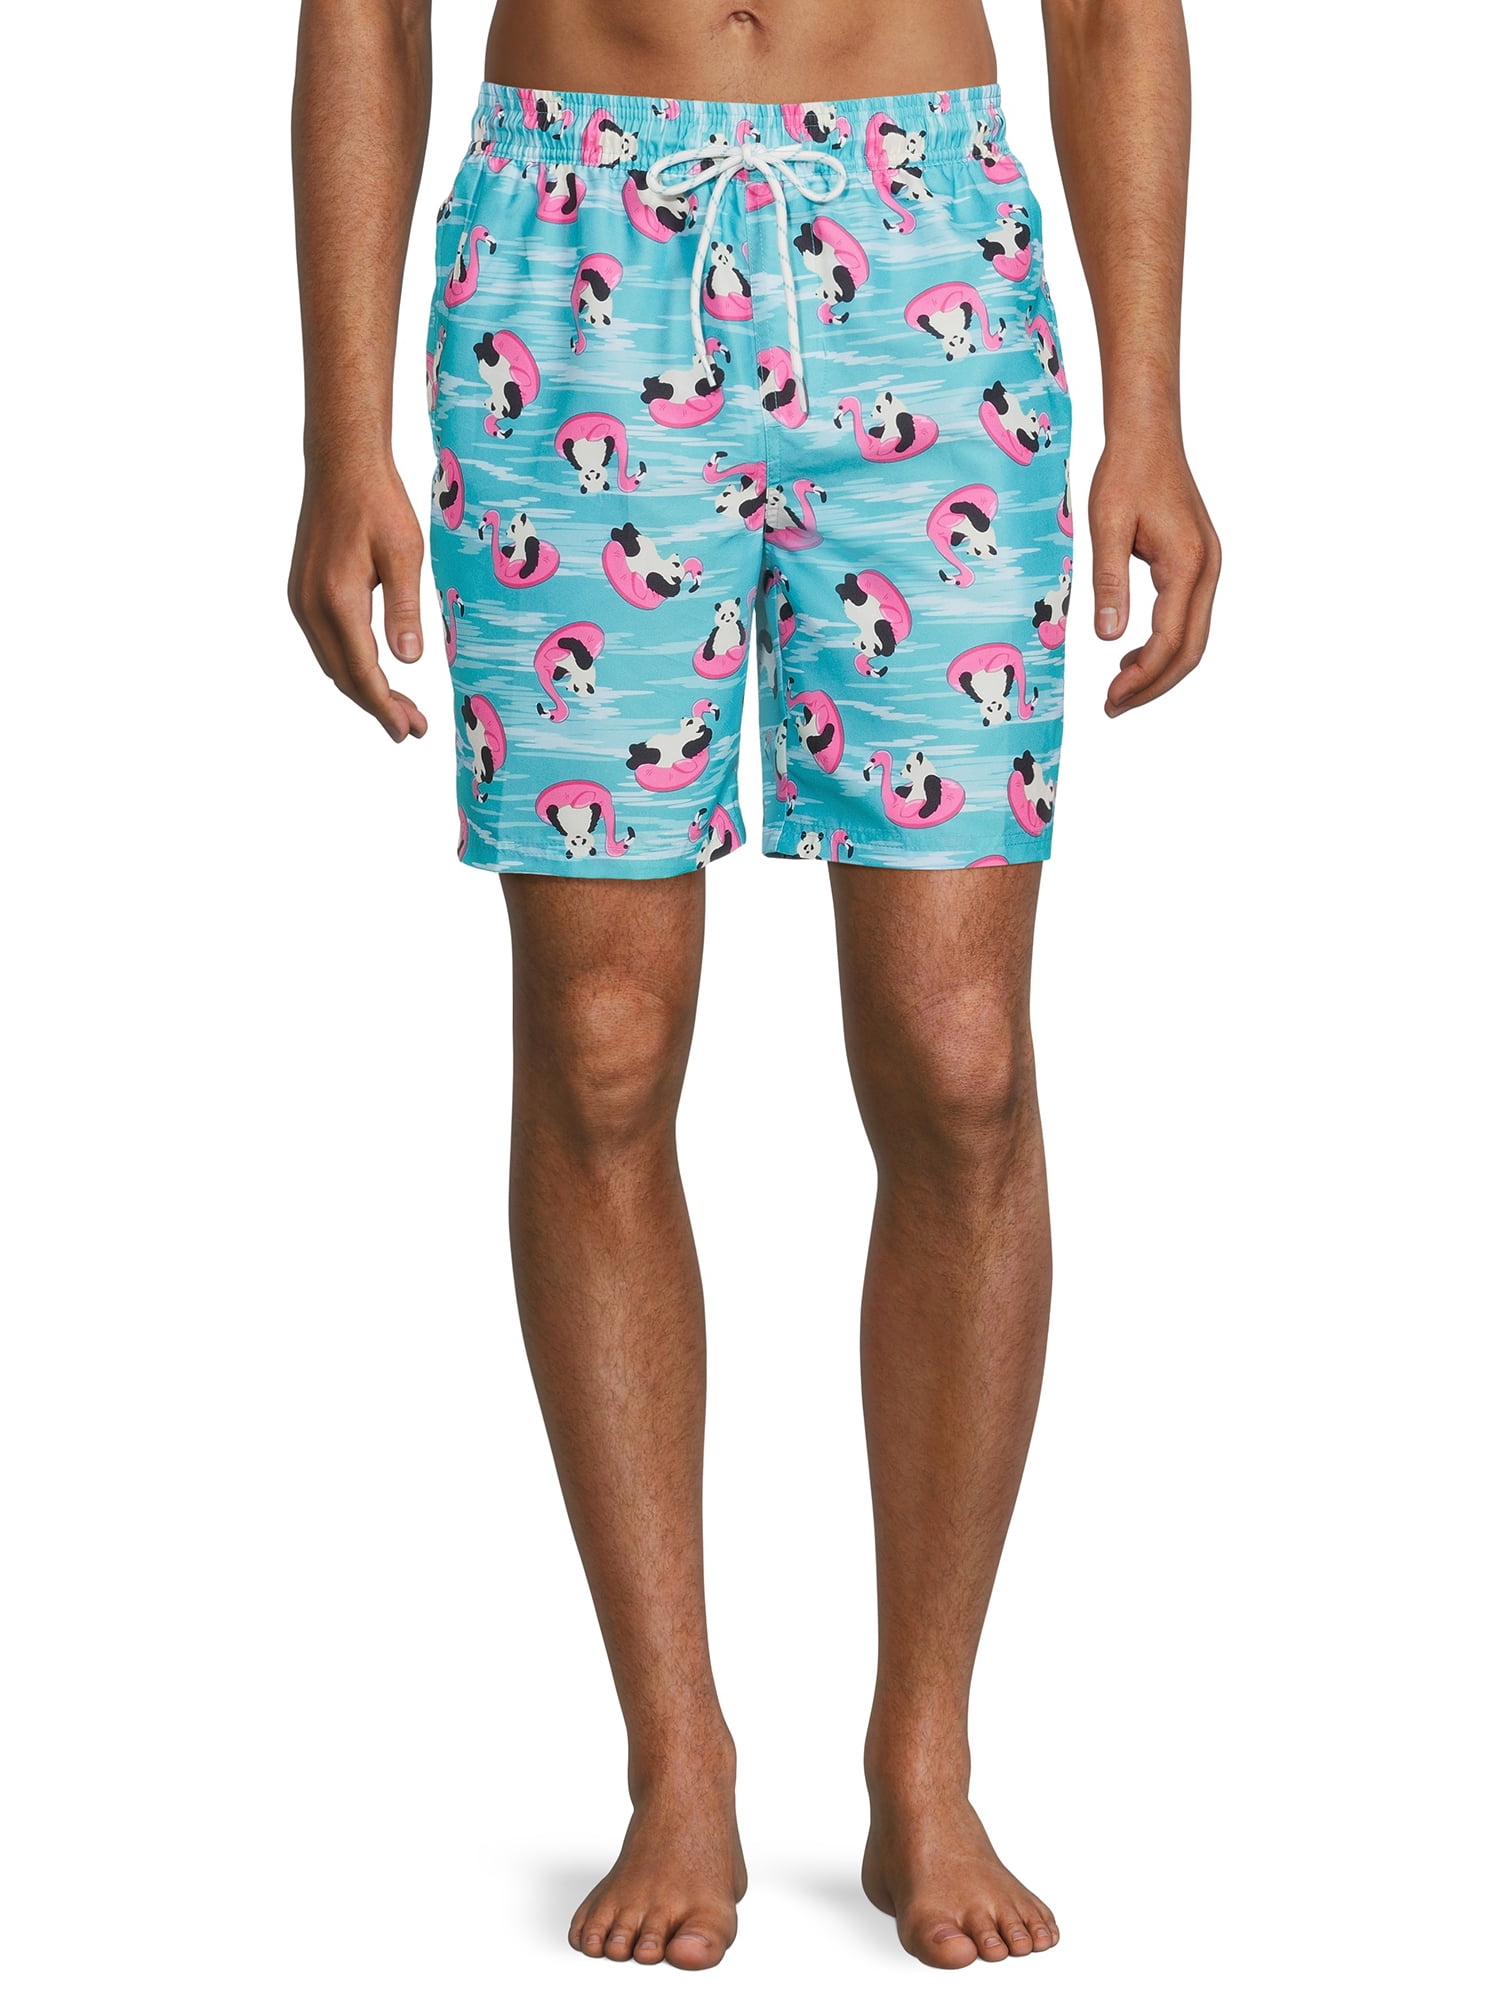 Skull Faces Art Print Young Men Swimming Trunks Running Stretch